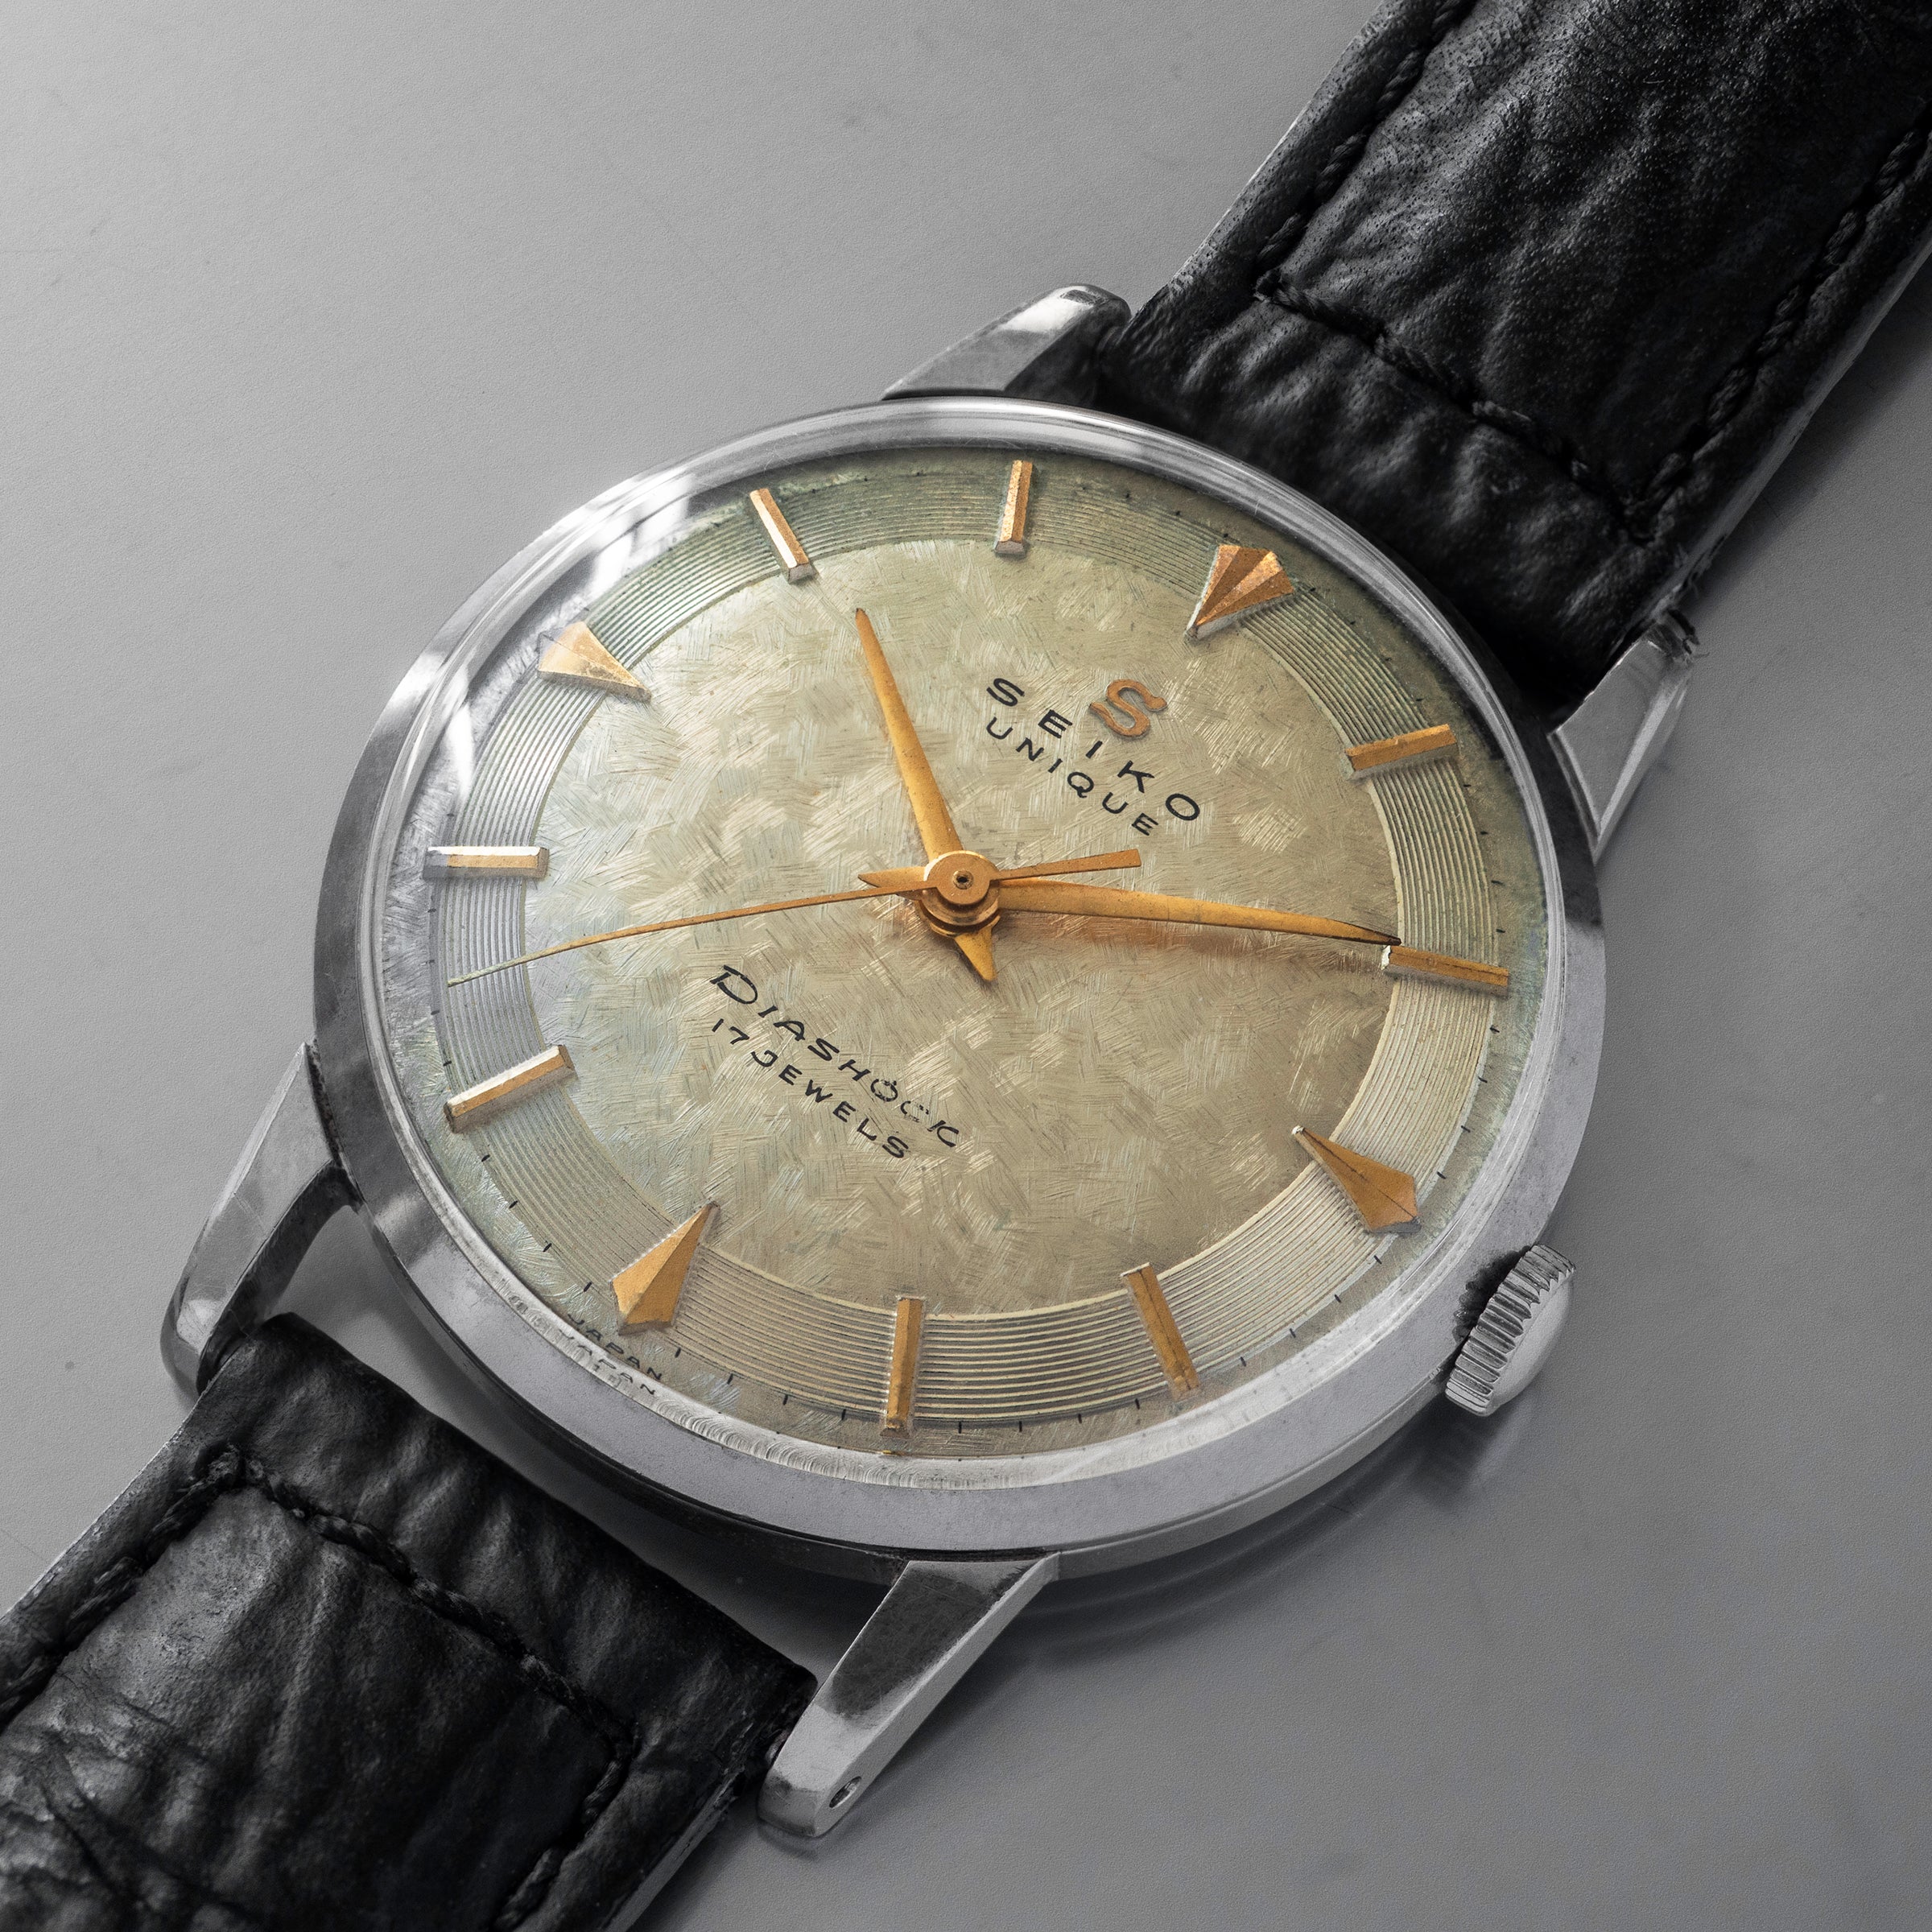 No. 532A / Seiko Unique - 1958 – From Time To Times